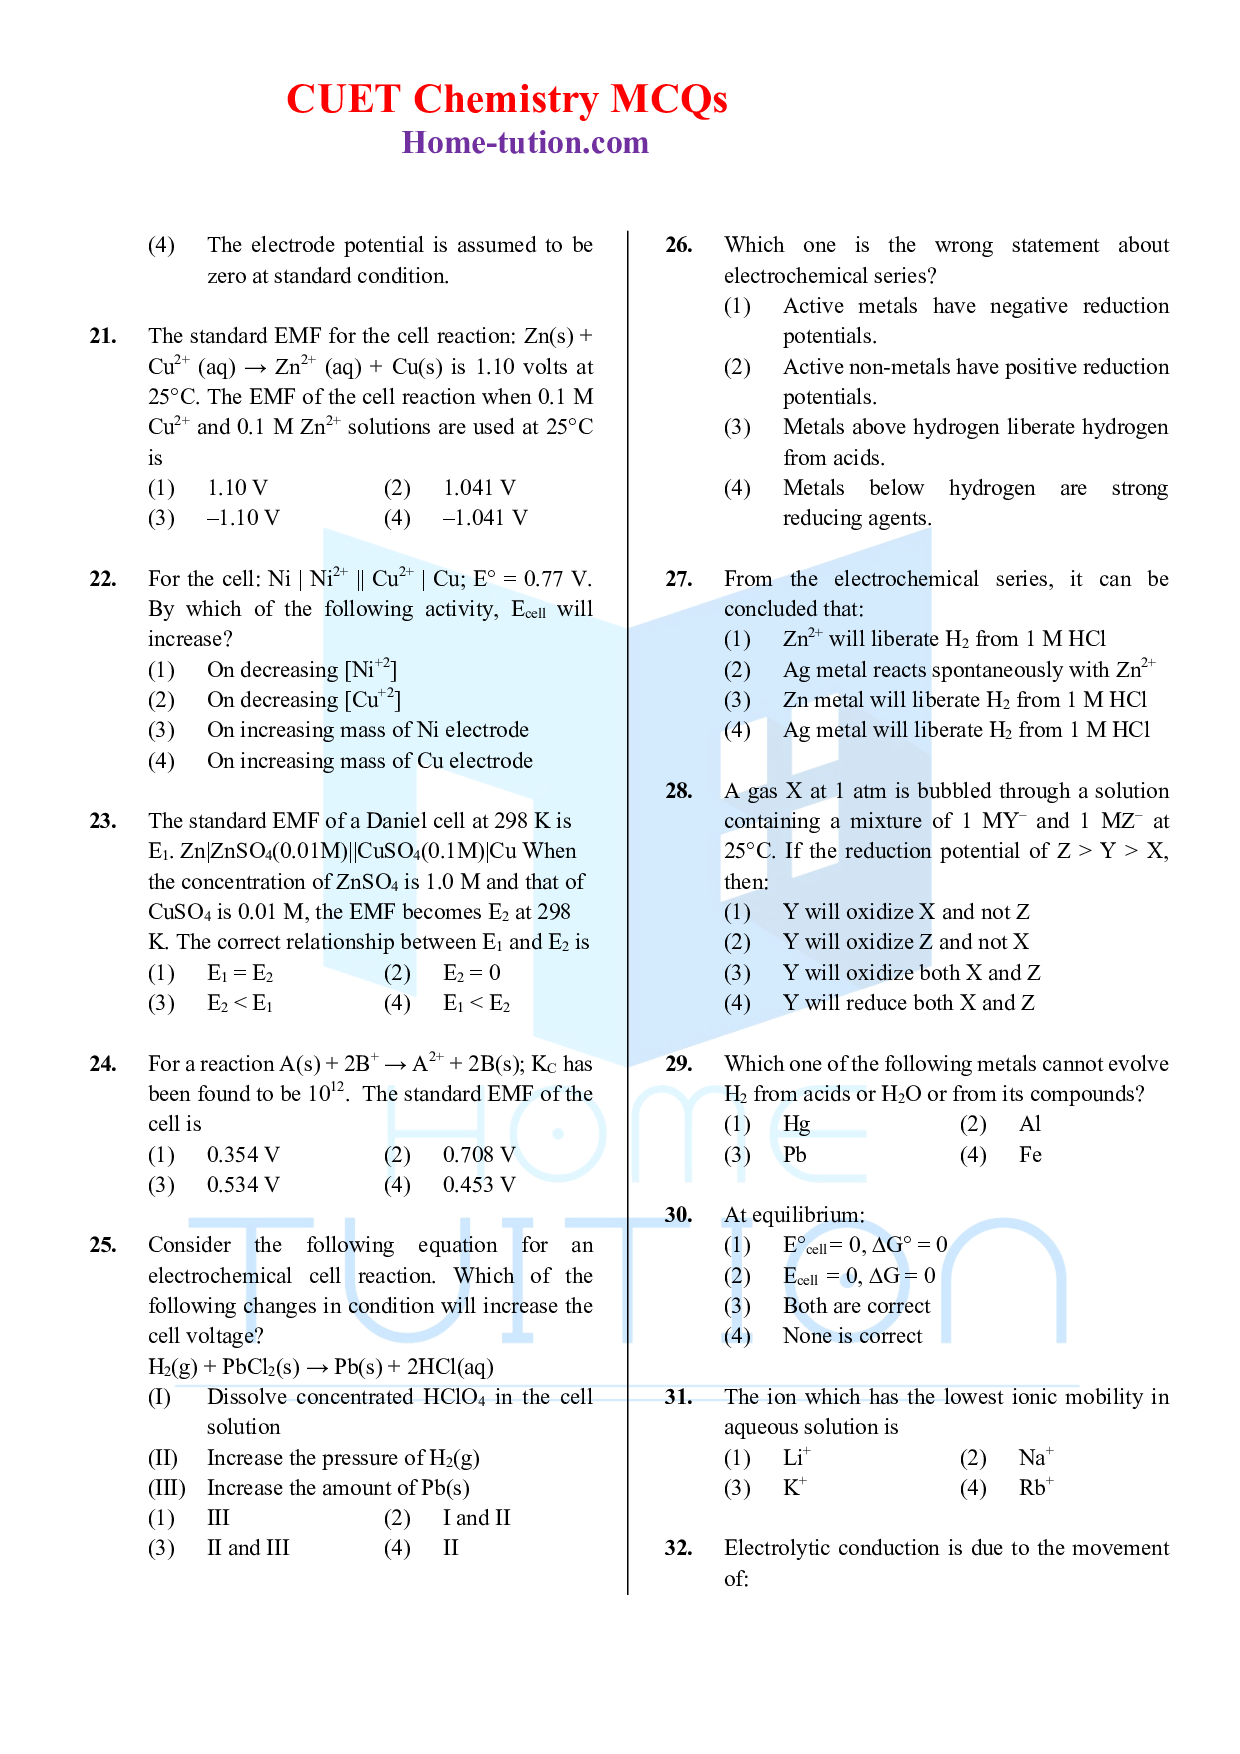 CUET MCQ Questions For Chapter-03 Electrochemistry